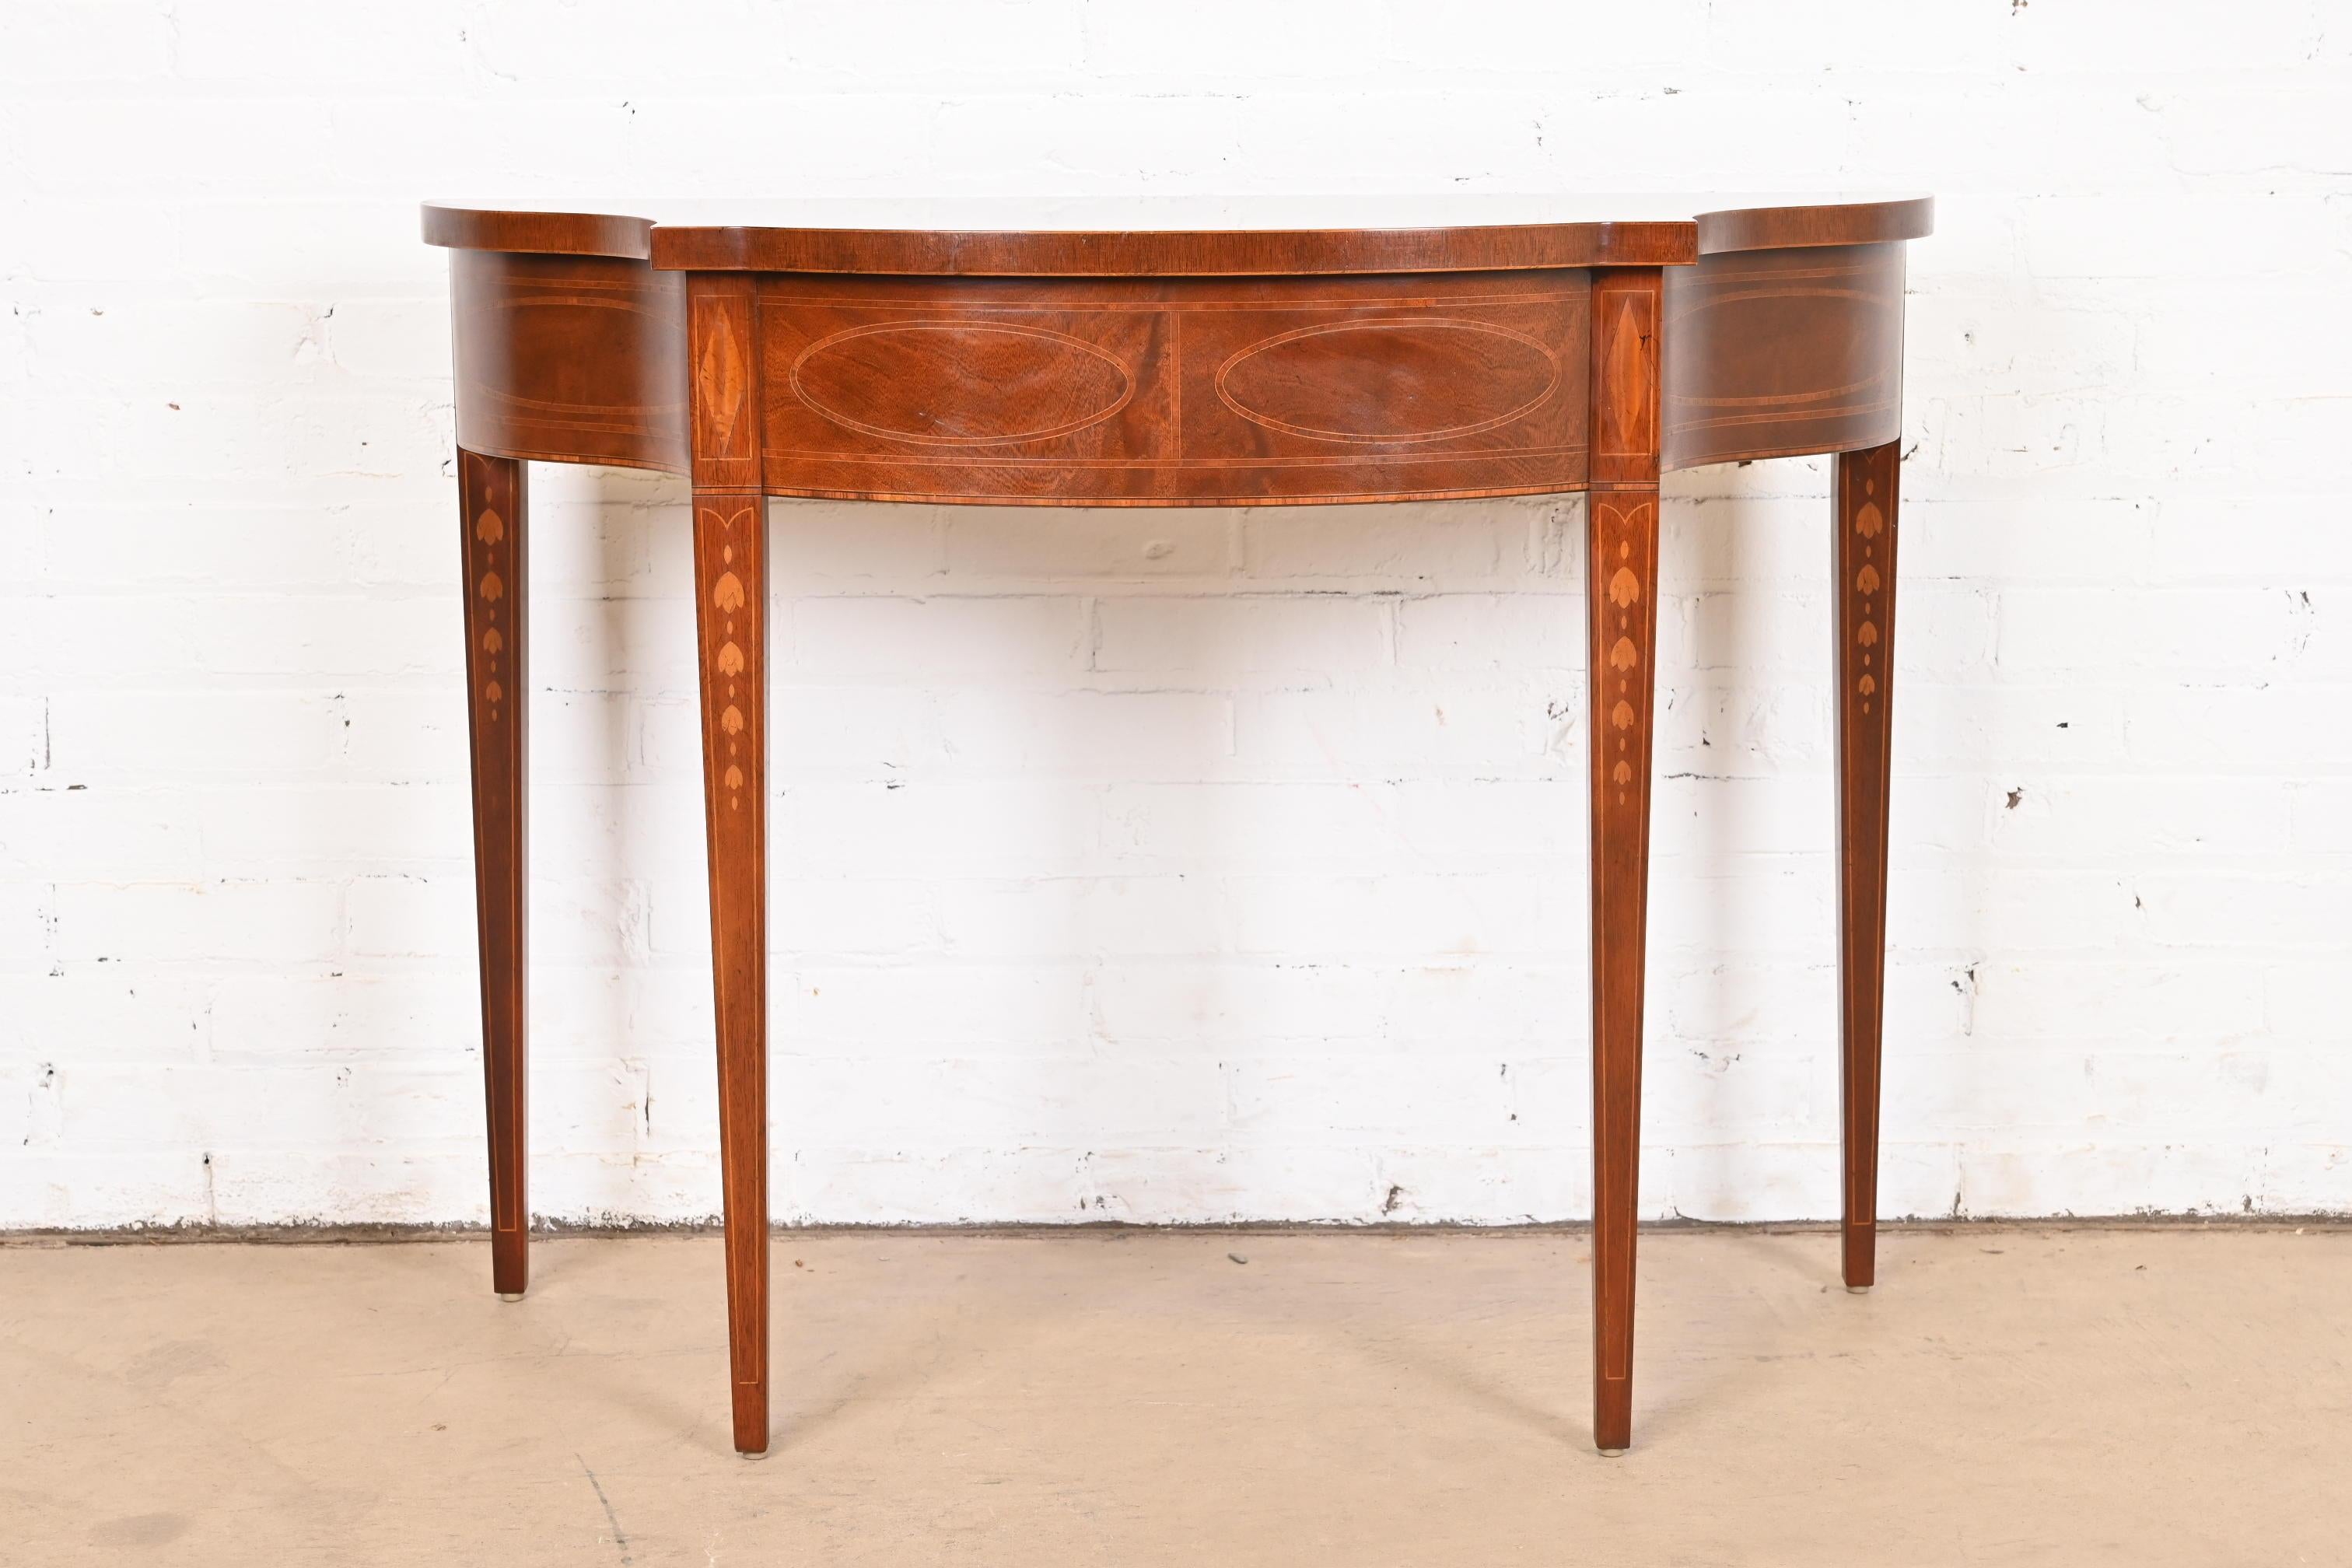 American Baker Furniture Historic Charleston Federal Mahogany Console or Entry Table